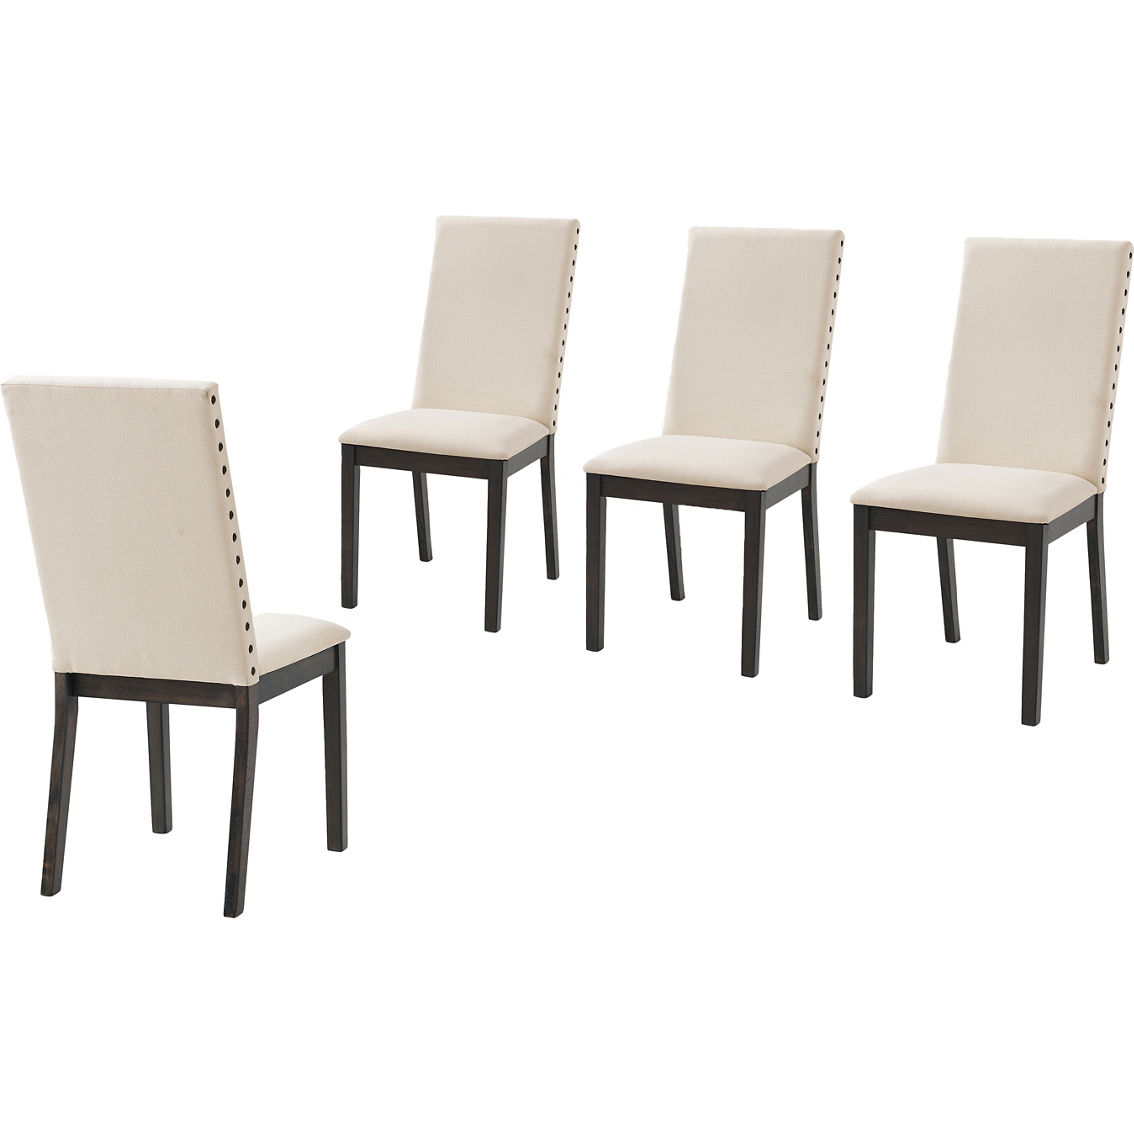 Crosley Furniture Hayden Upholstered Dining Chair 4 pk. - Image 2 of 3